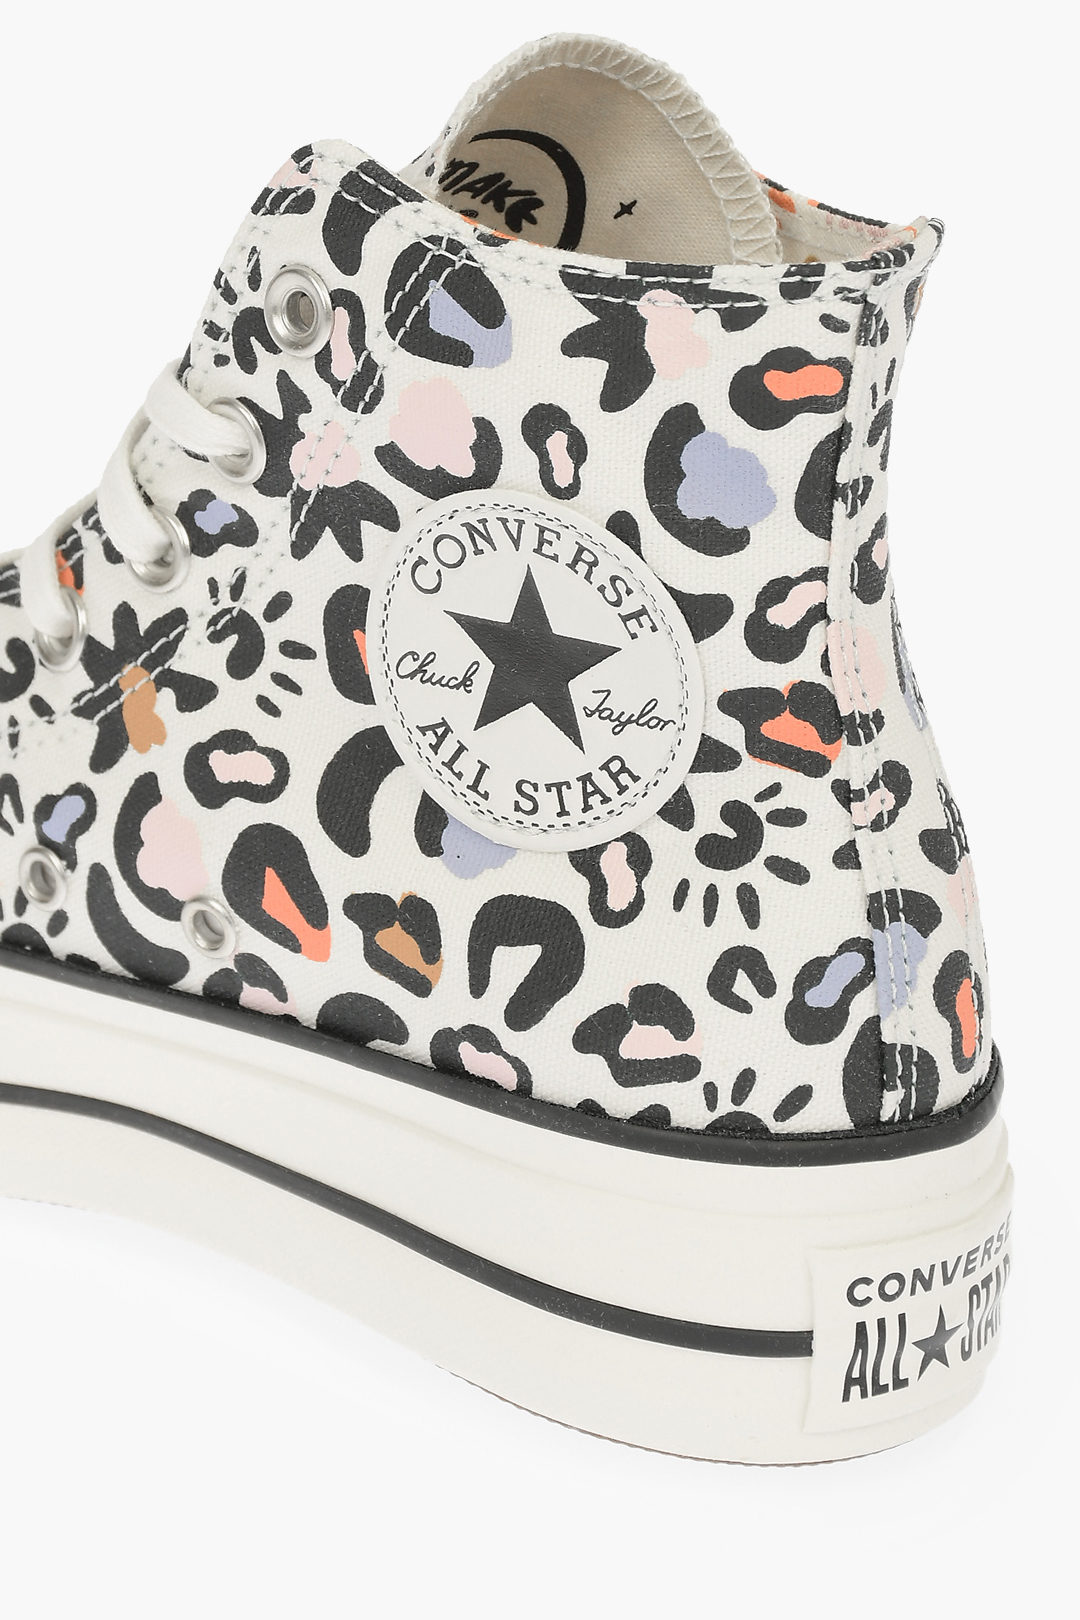 surplus Rainy circuit Converse ALL STAR Printed Sneaker women - Glamood Outlet